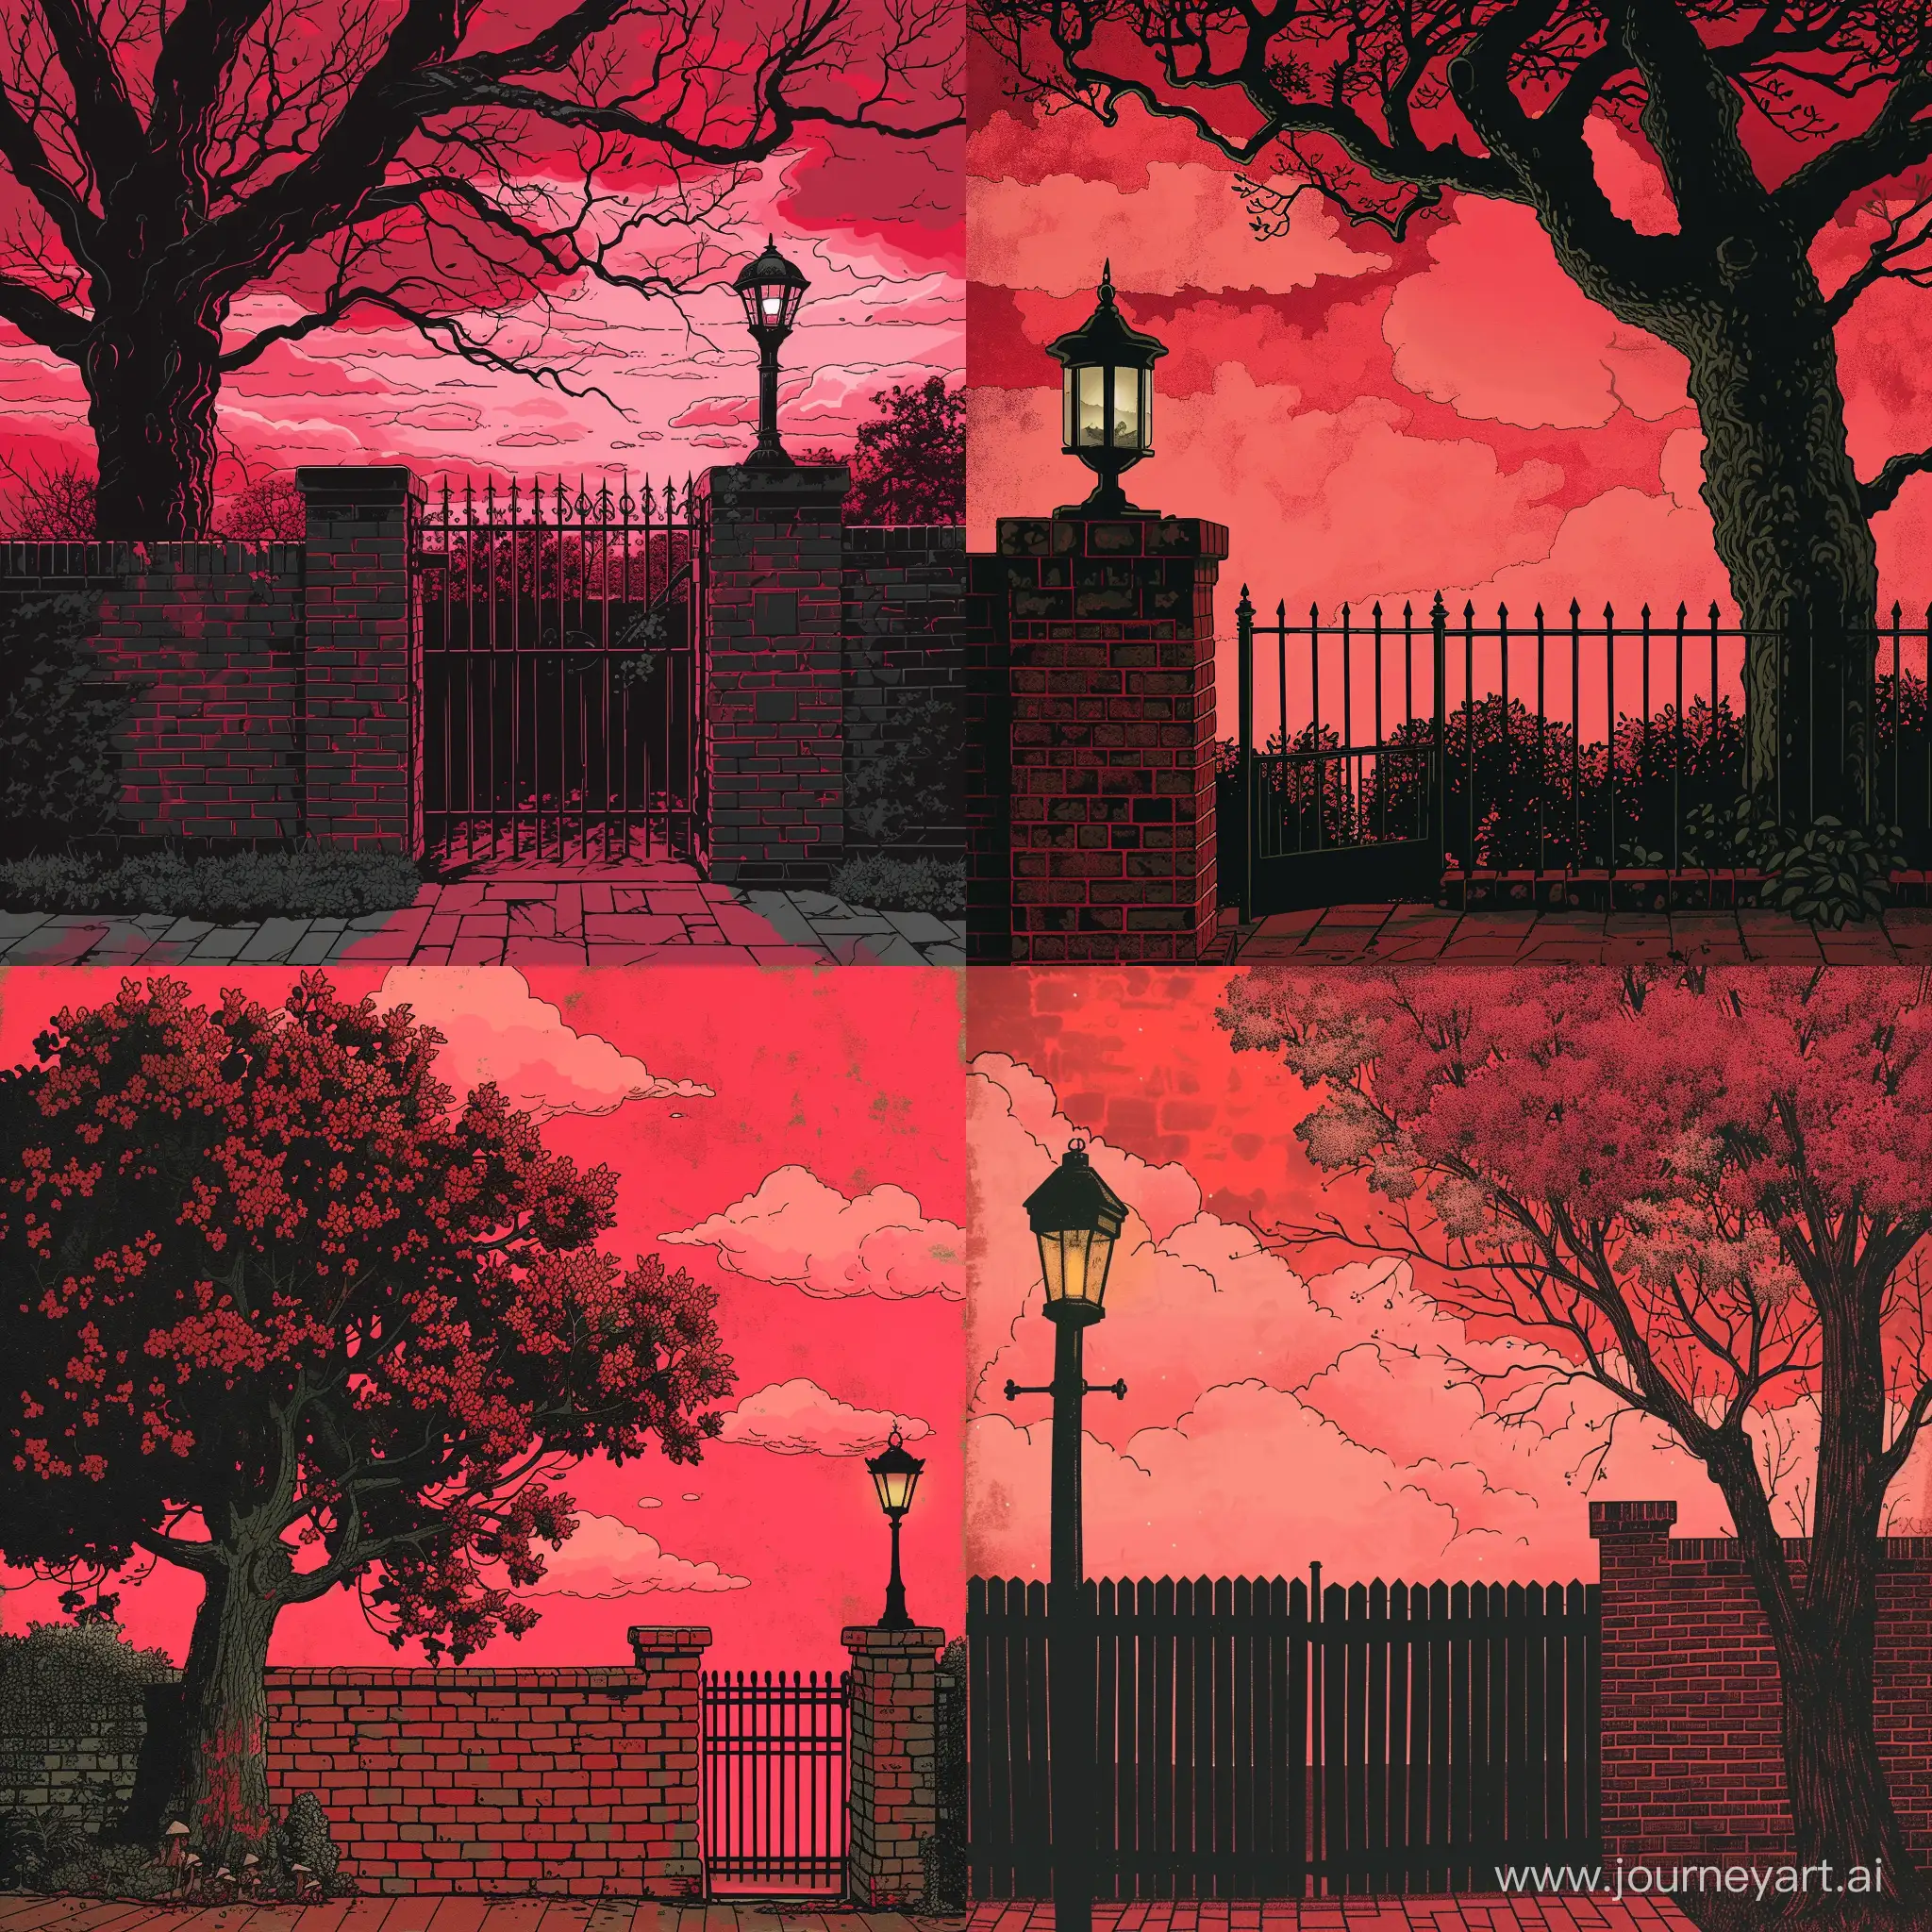 Charming-OldStyle-Brick-Fence-with-Lantern-Lamp-under-Pink-Sky